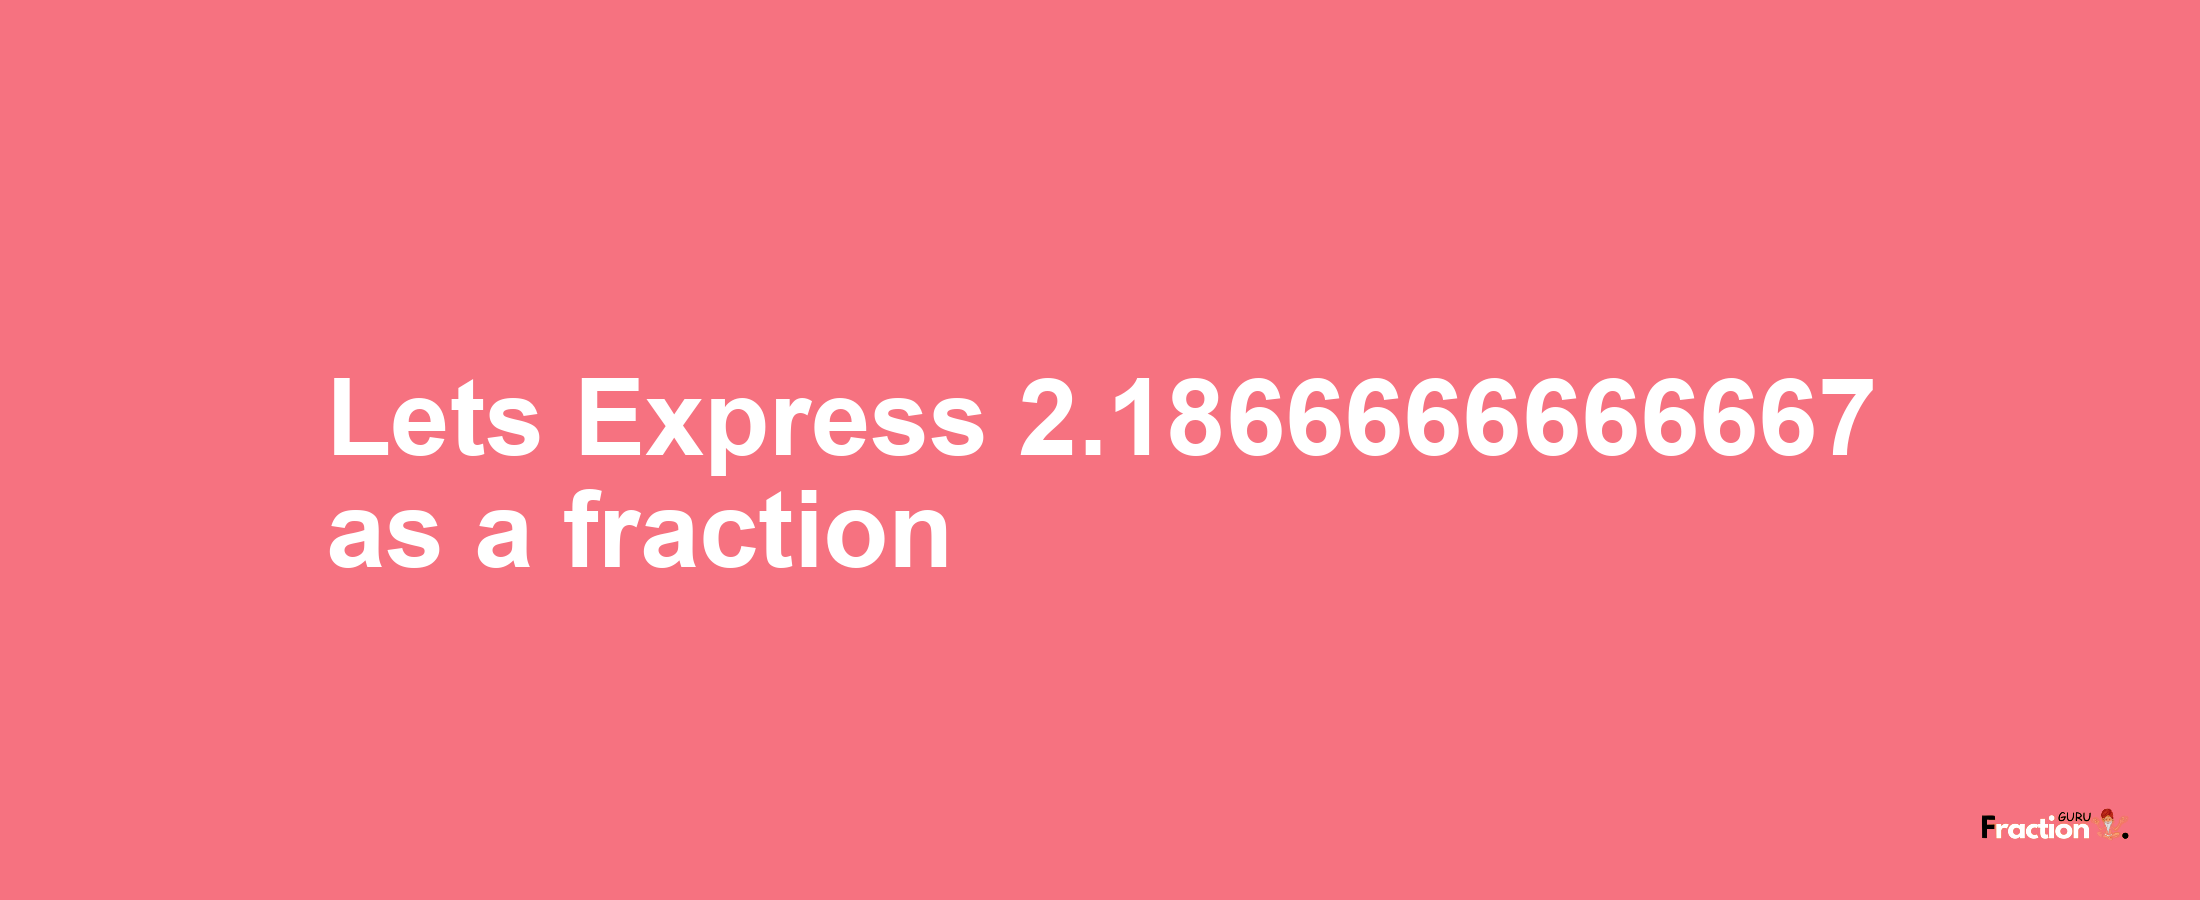 Lets Express 2.1866666666667 as afraction